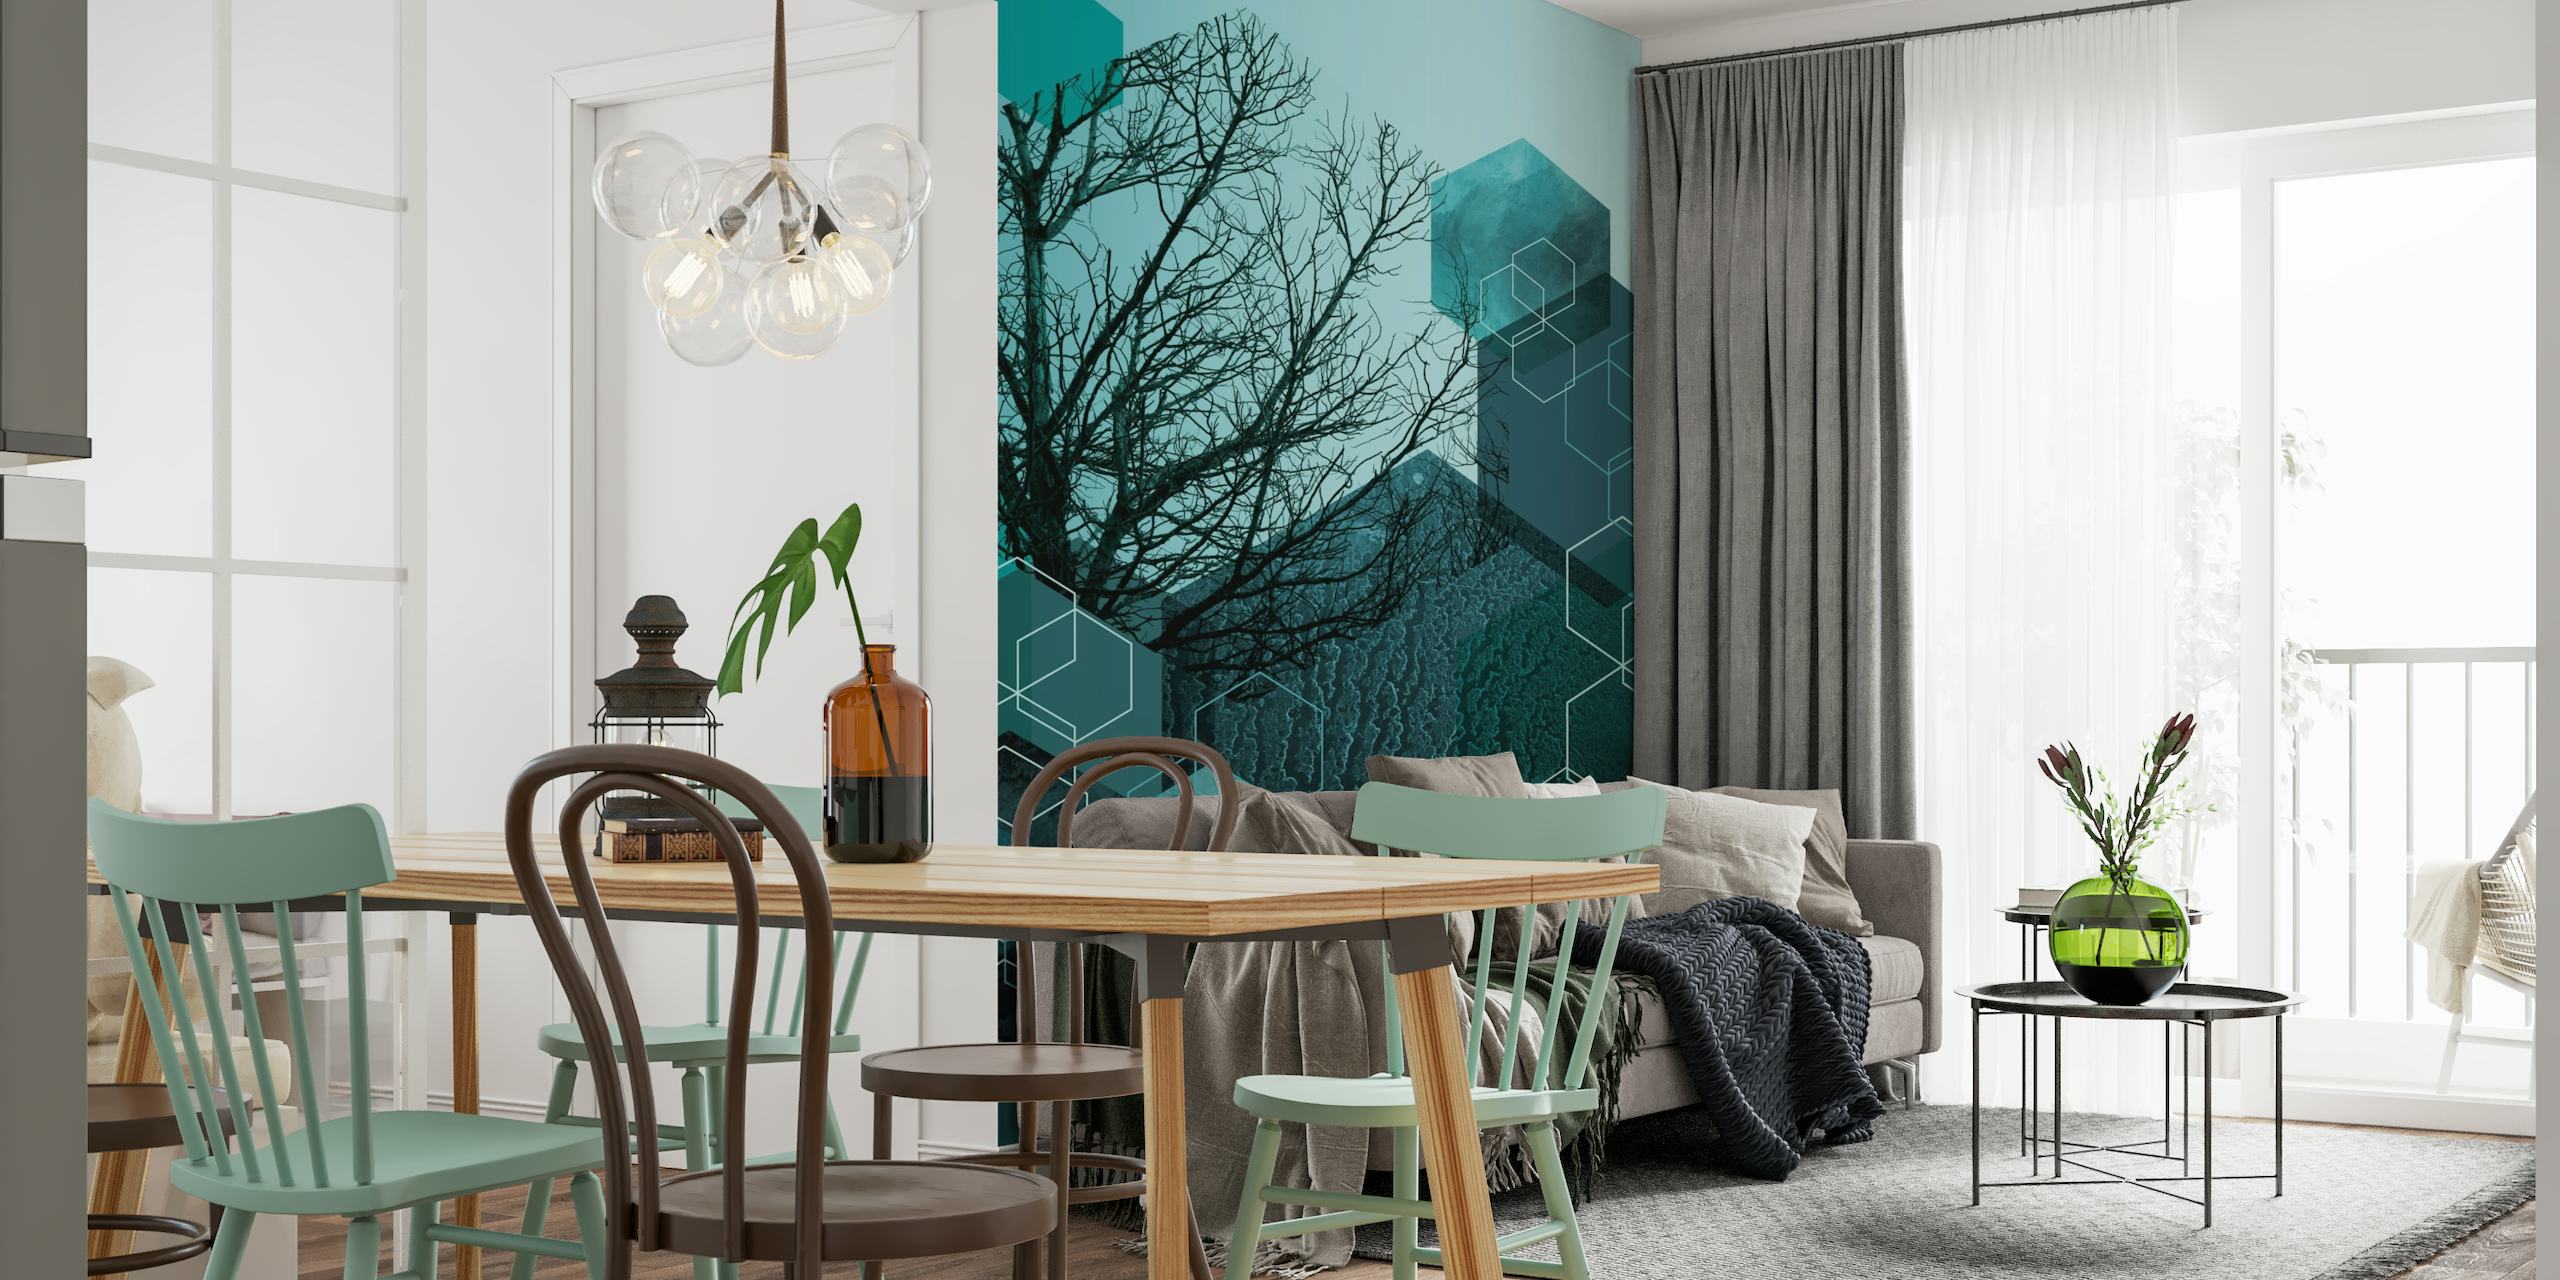 Teal Tree 1 wall mural featuring a tree silhouette with geometric patterns